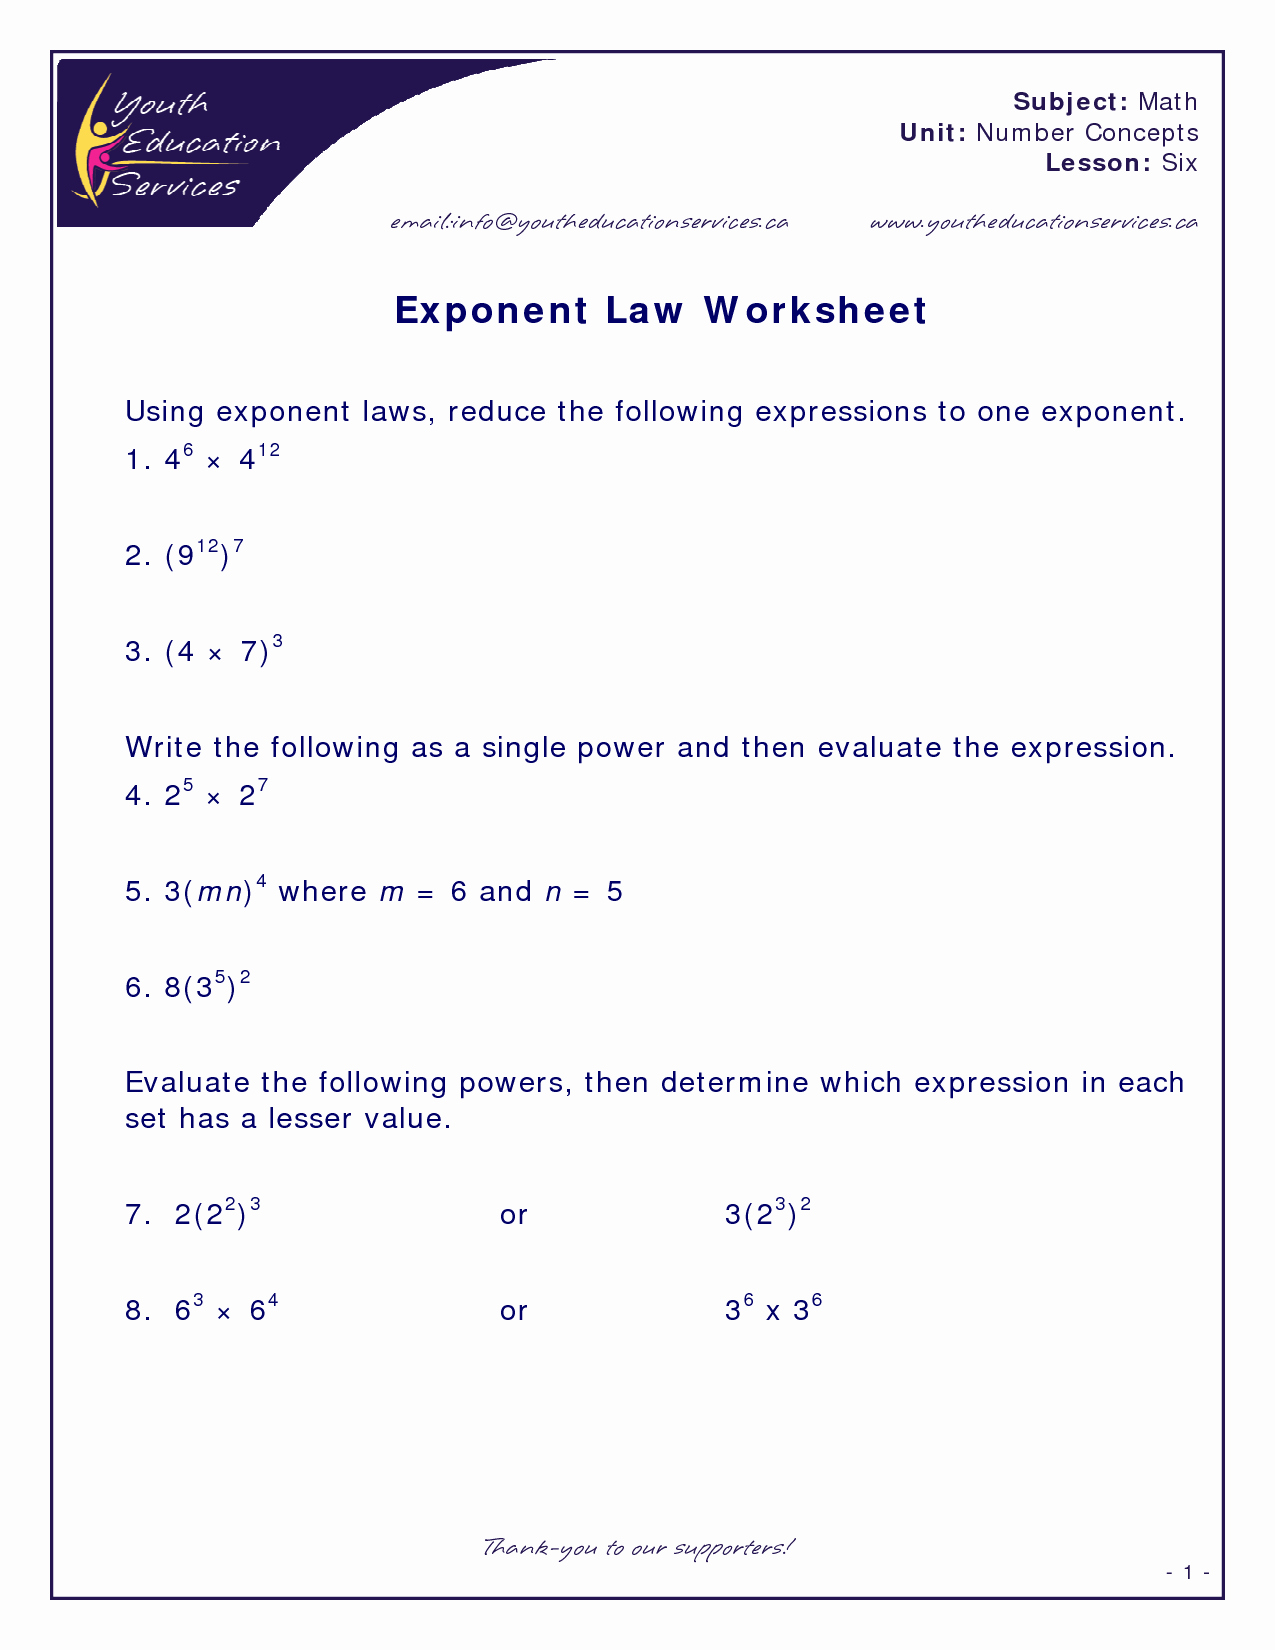 Rules Of Exponents Worksheet Pdf Lovely Exponent Product Rule Worksheet Pdf Algebra 1 Worksheets